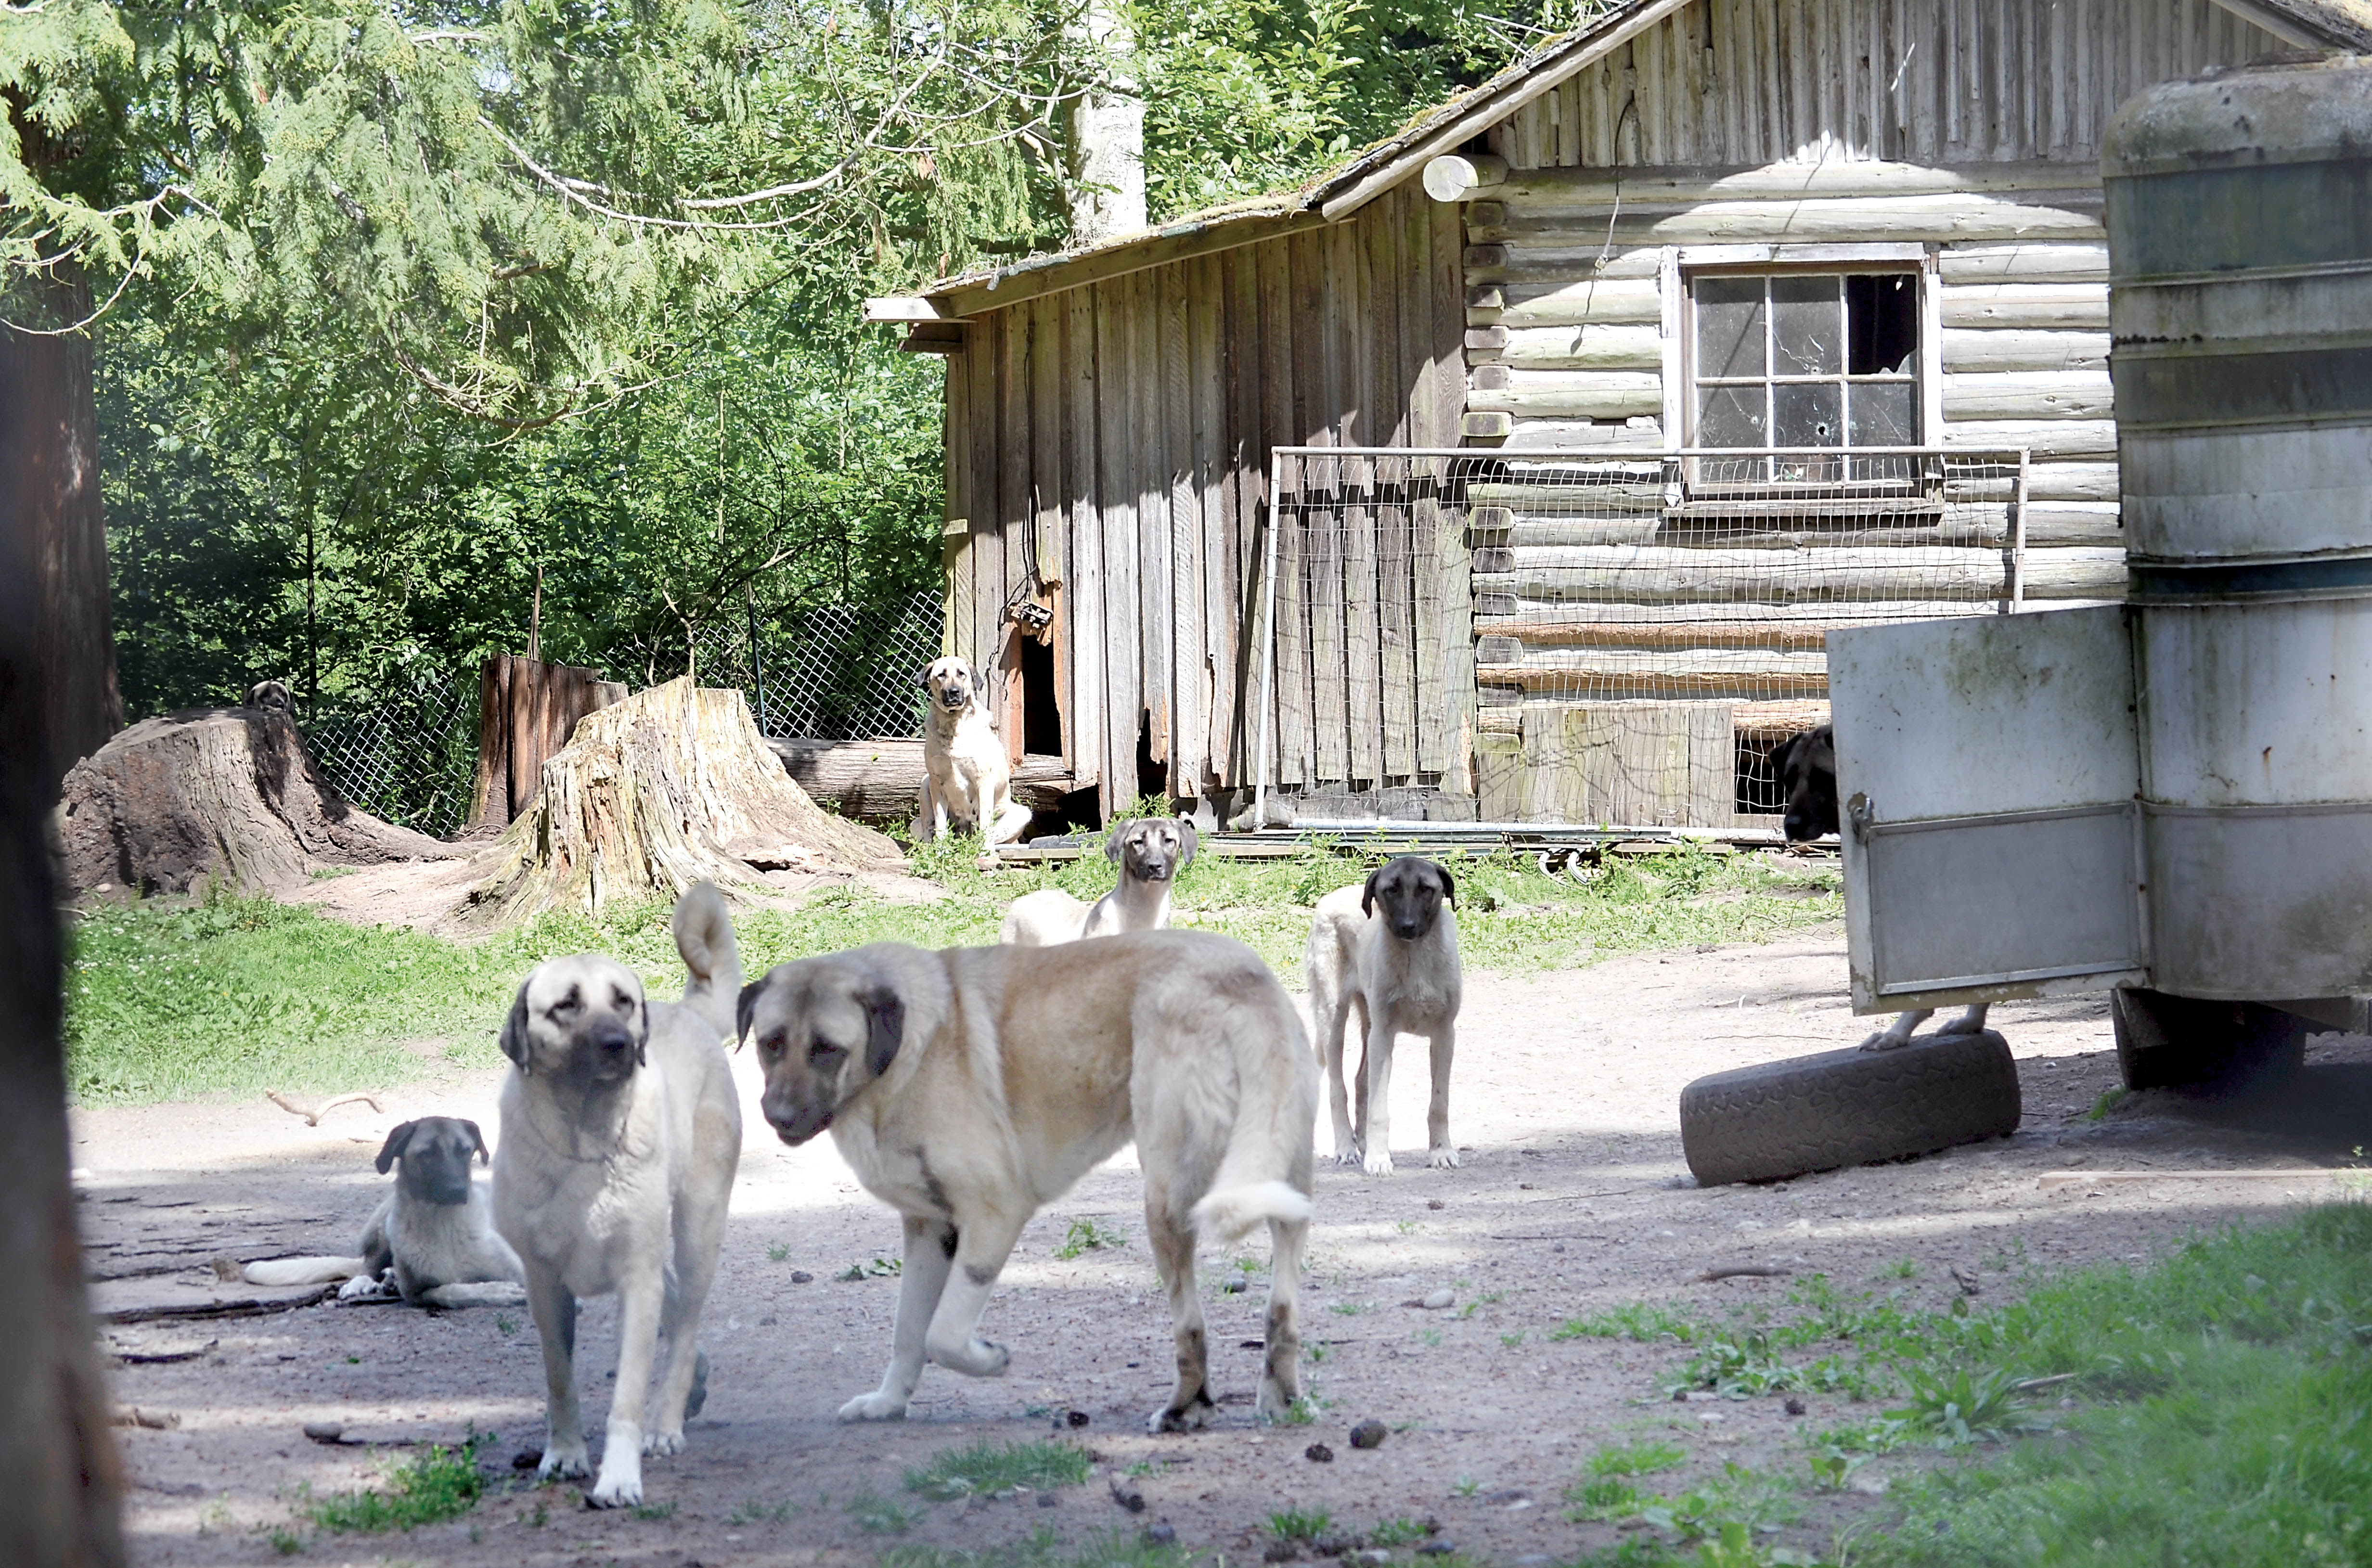 Dogs identified as Anatolian shepherds or kangals lived under a shed or cabin before being moved to safer facilities. — Jefferson County Sheriff’s Office ()